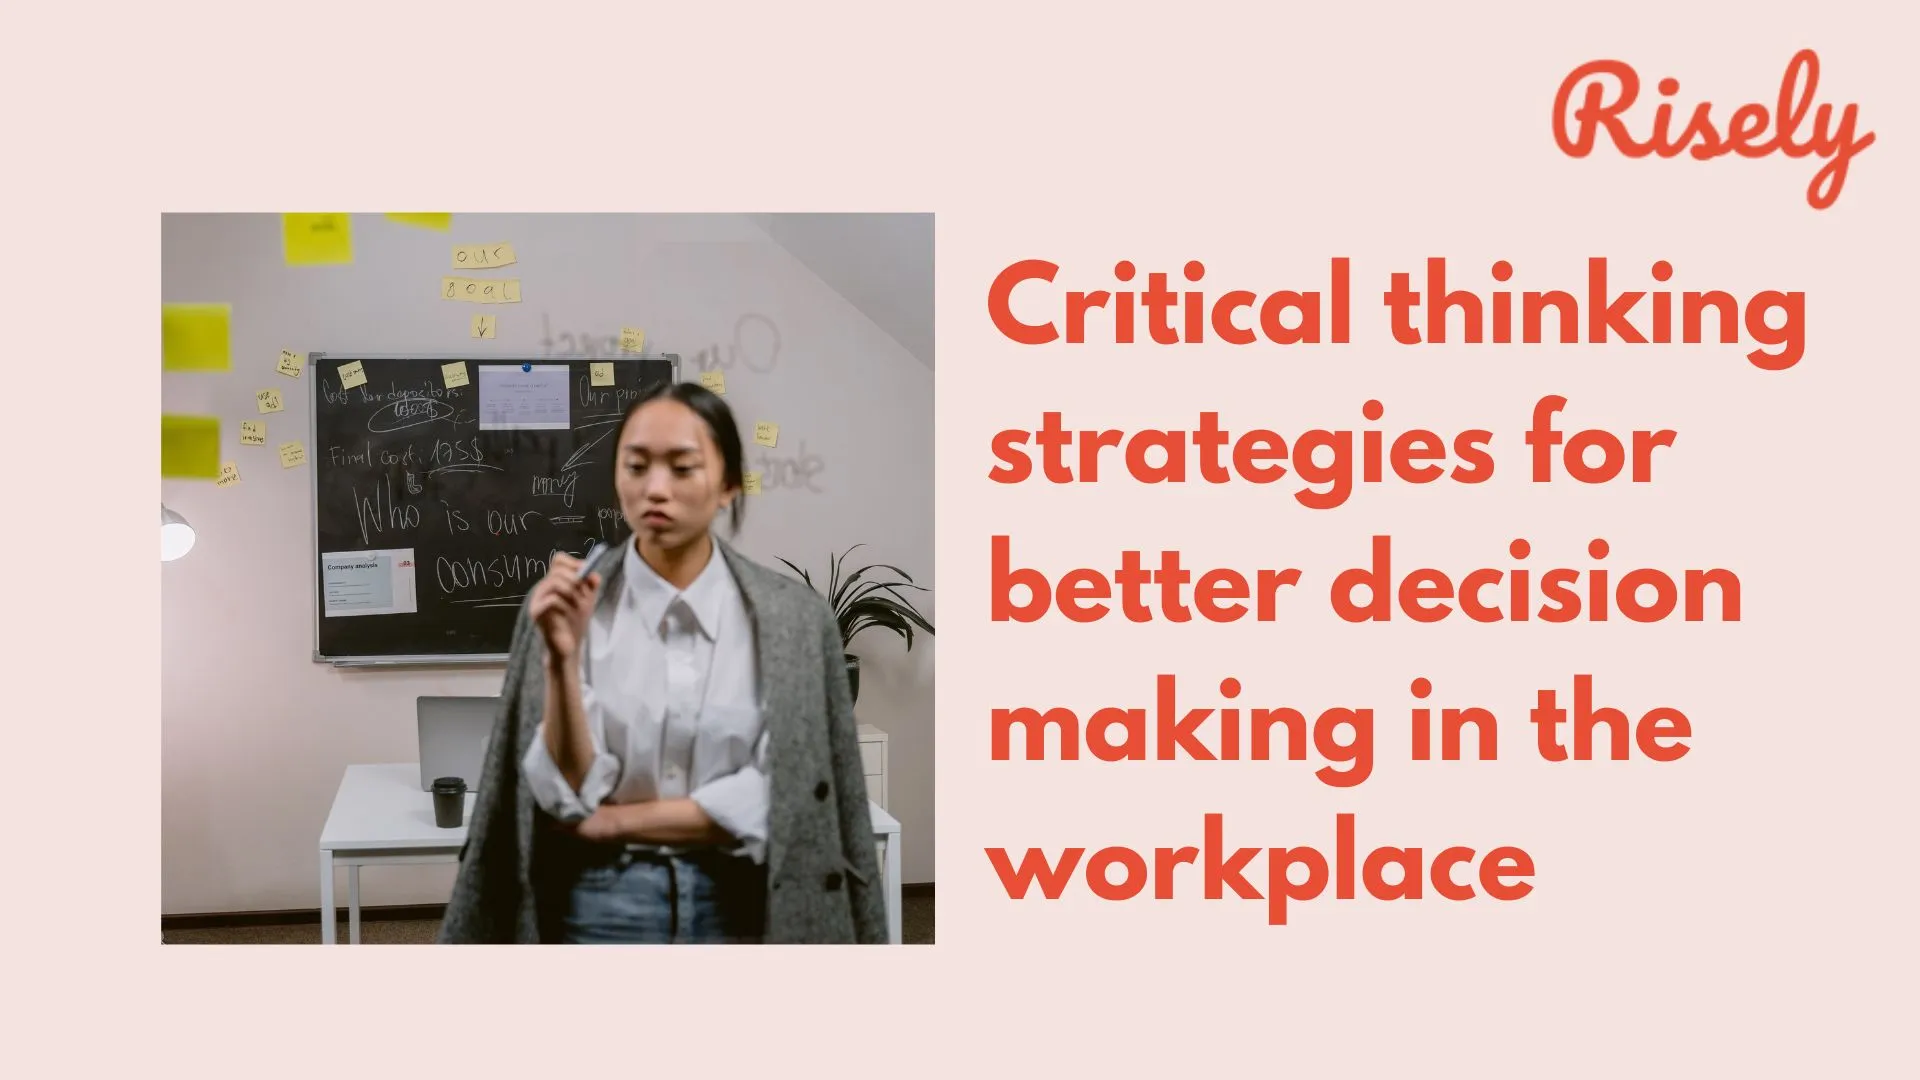 Critical thinking strategies for better decision making in the workplace